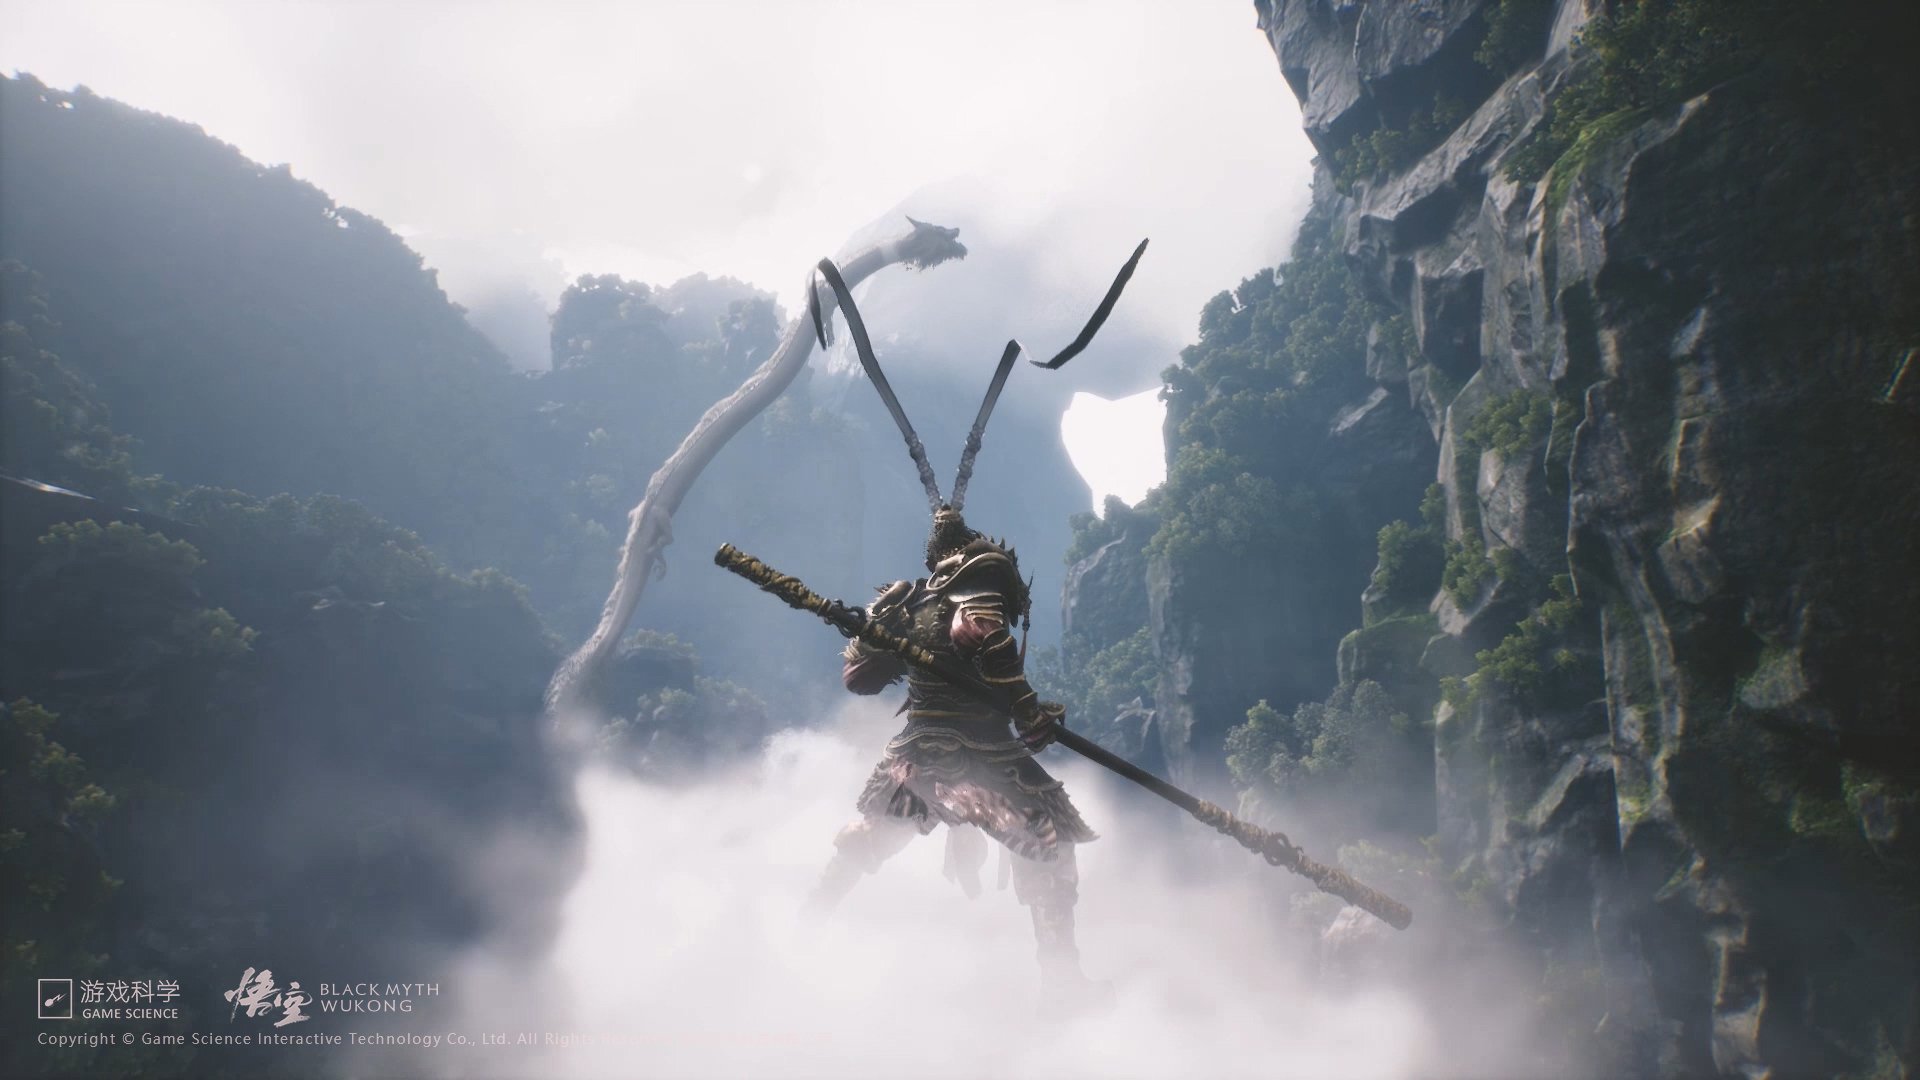 New Black Myth: Wukong trailer shows off explosive staff moves, daunting new bosses